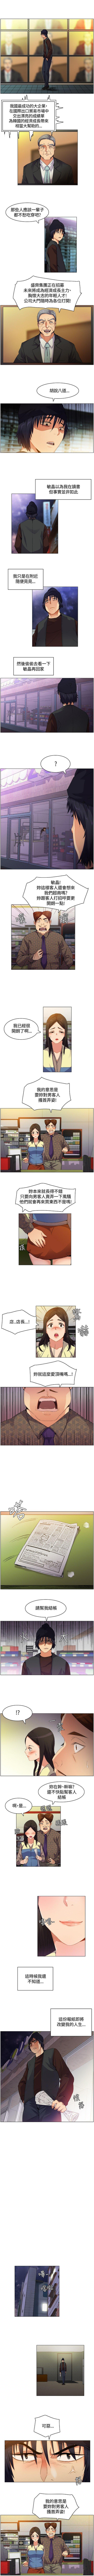 Joi 無名島 1-44 Gros Seins - Page 5